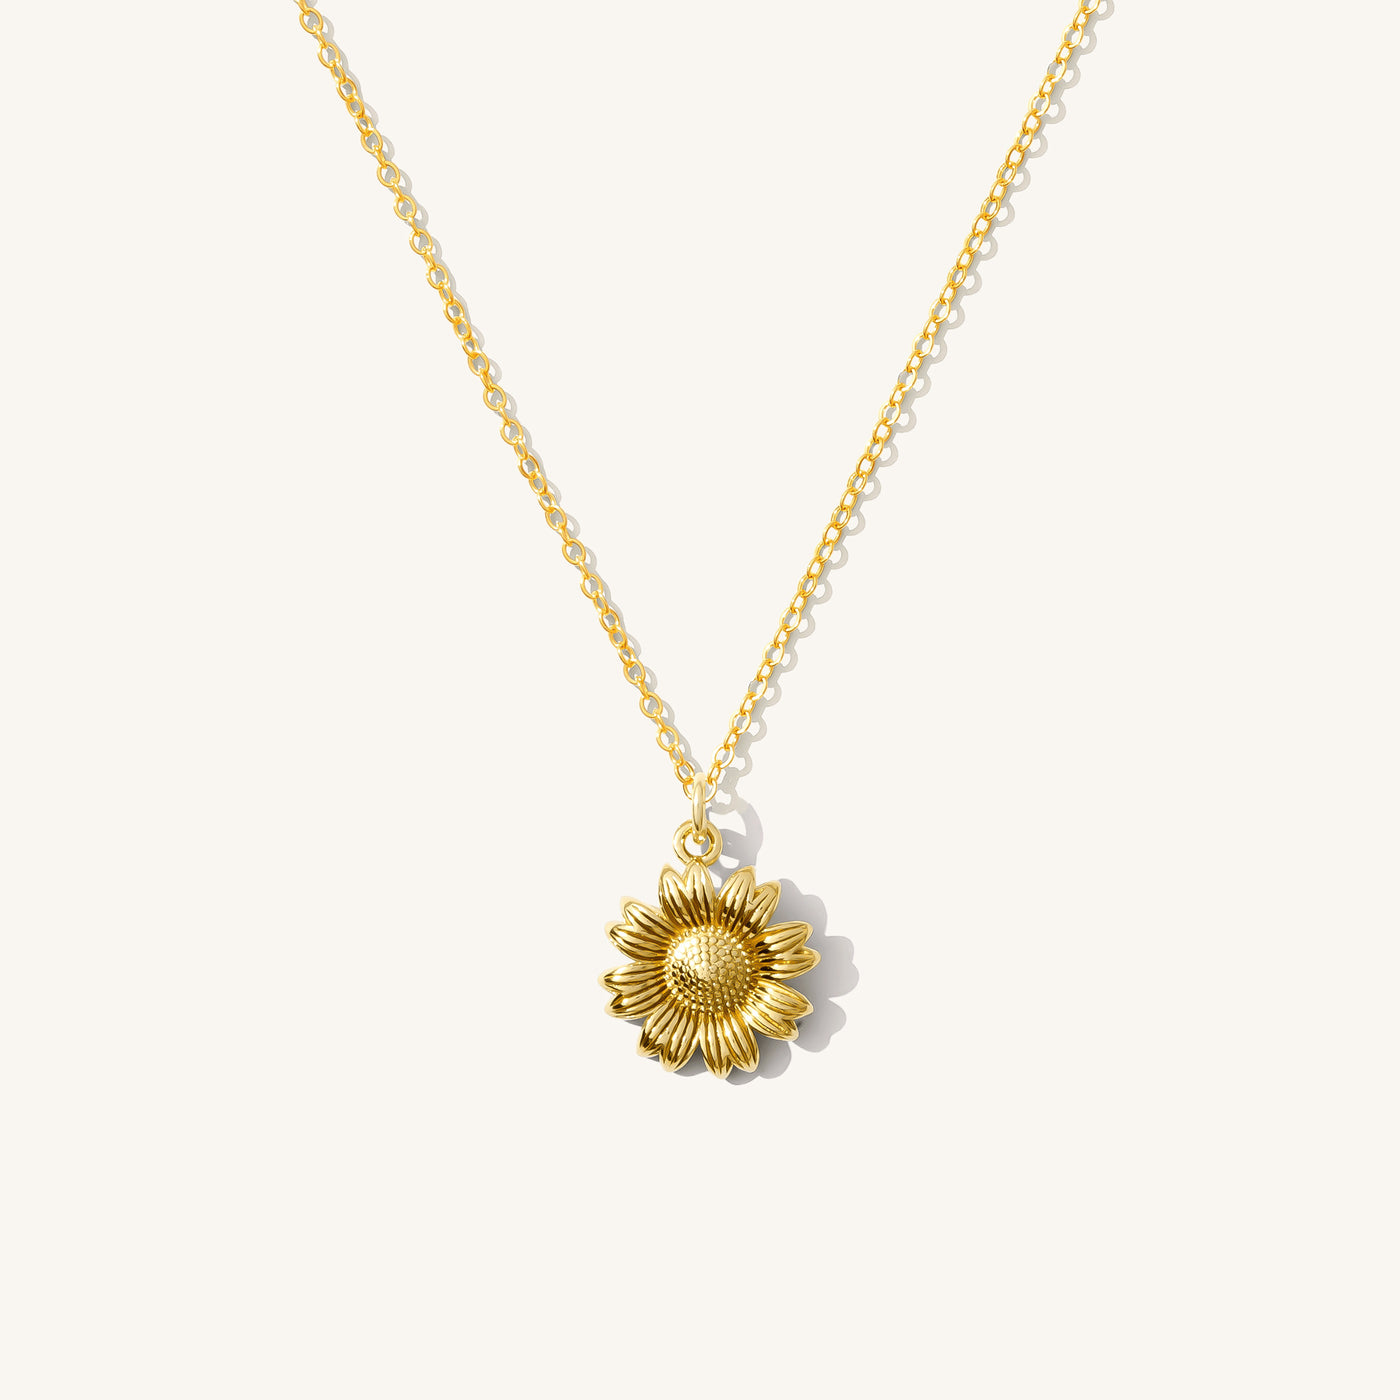 Buy 9ct Yellow Gold Sunflower Necklace With Blue Topaz, Sunflower  Jewellery, Solid Gold Flower Pendant Online in India - Etsy